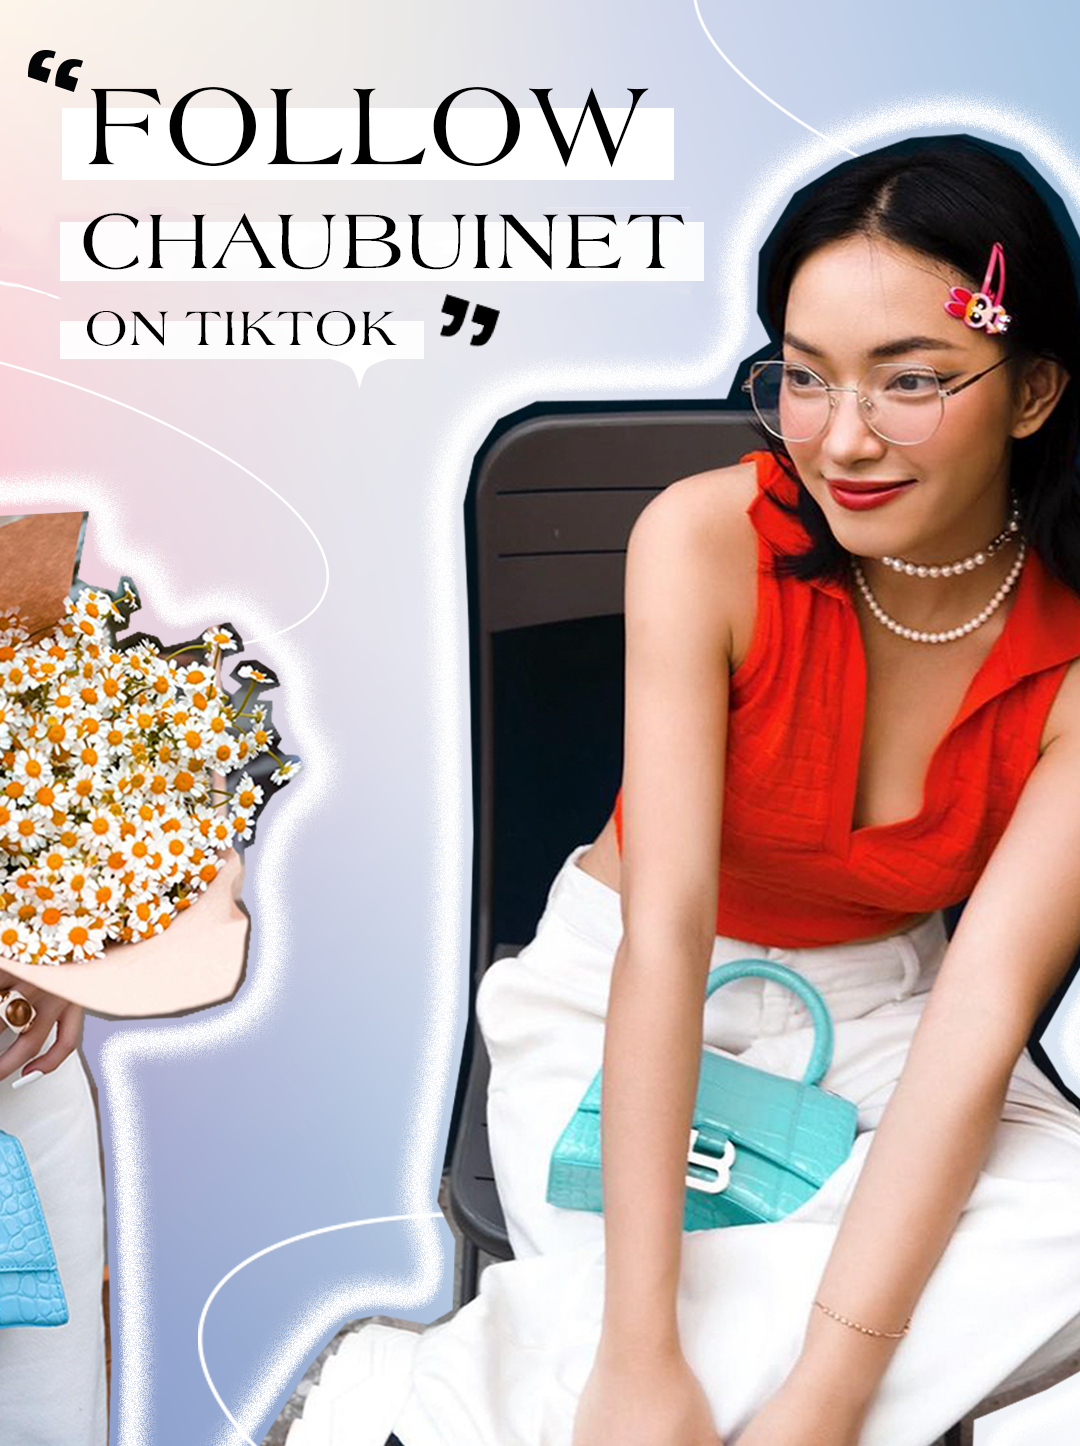 Chanel COCO Crush - A story of encounters - Chaubuinet